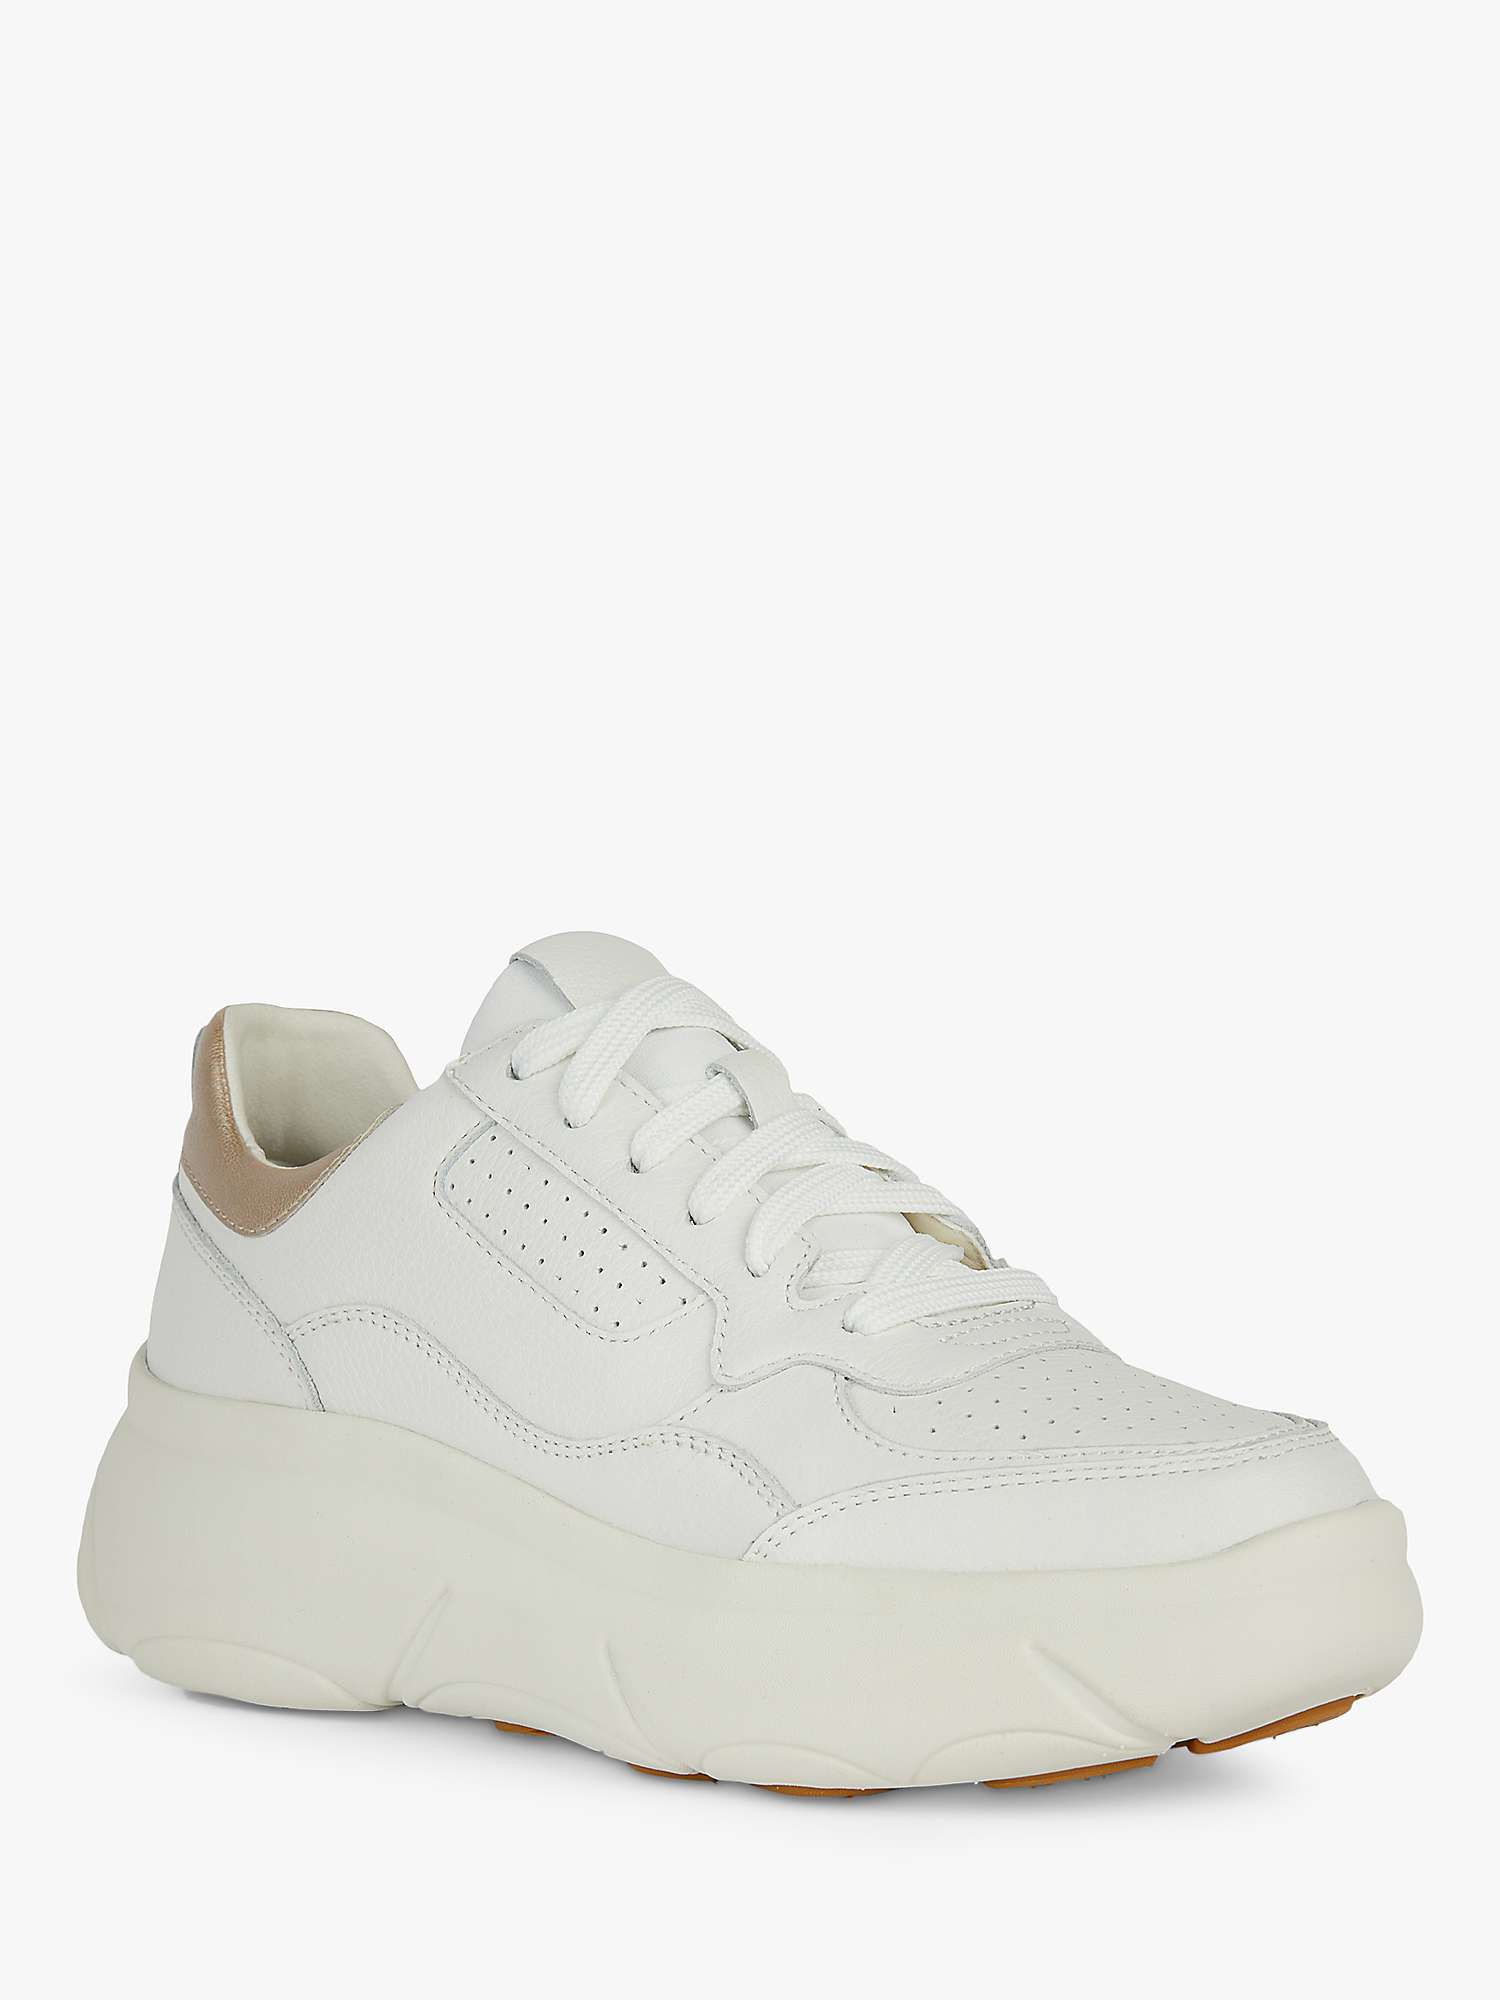 Buy Geox Nebula 2.0 X Chunky Sole Trainers Online at johnlewis.com